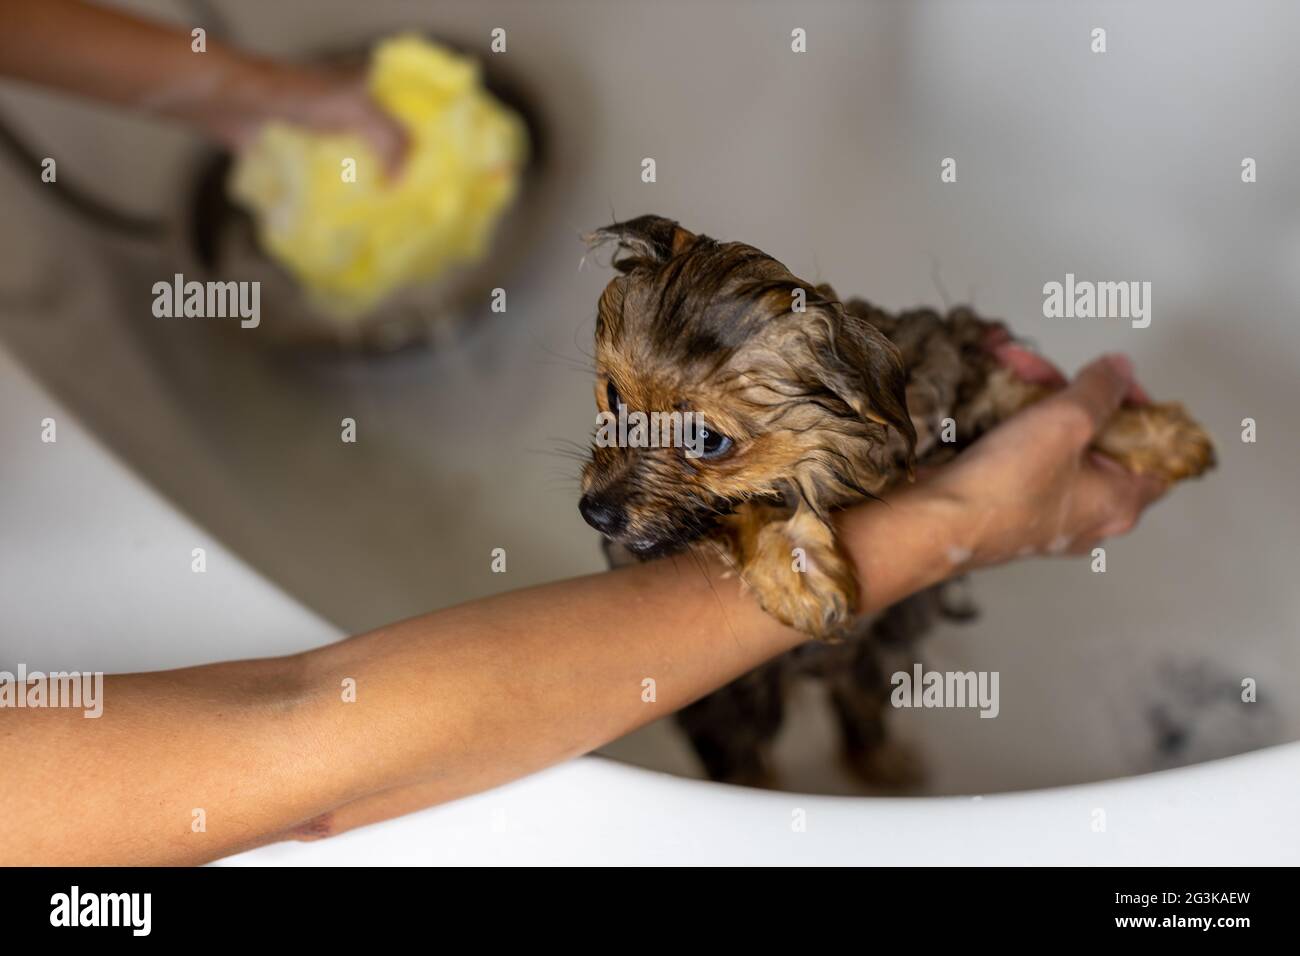 Woman taking care of her little dog. Female washing, cleaning Pomeranian dog under the shower. Animals hygiene concept Stock Photo